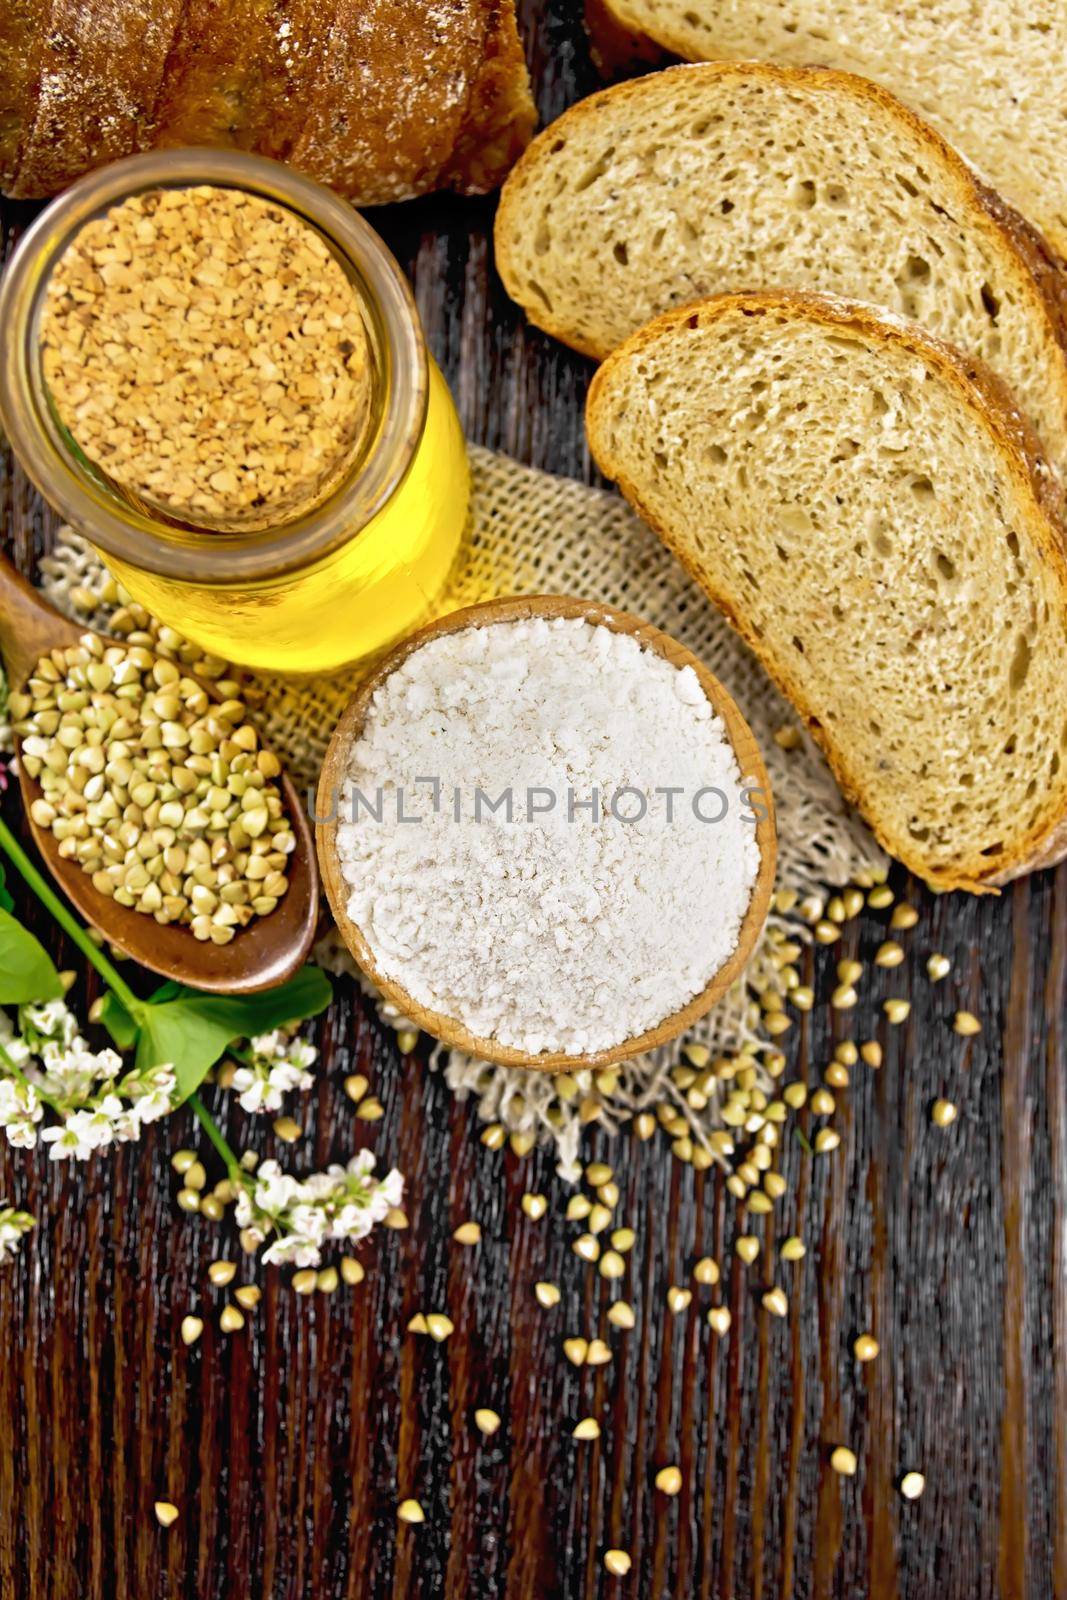 Buckwheat flour from green cereals in a bowl on sacking, groats in spoon and on a table, oil in glass jar, bread, fresh flowers and buckwheat leaves on background of dark wooden board from above